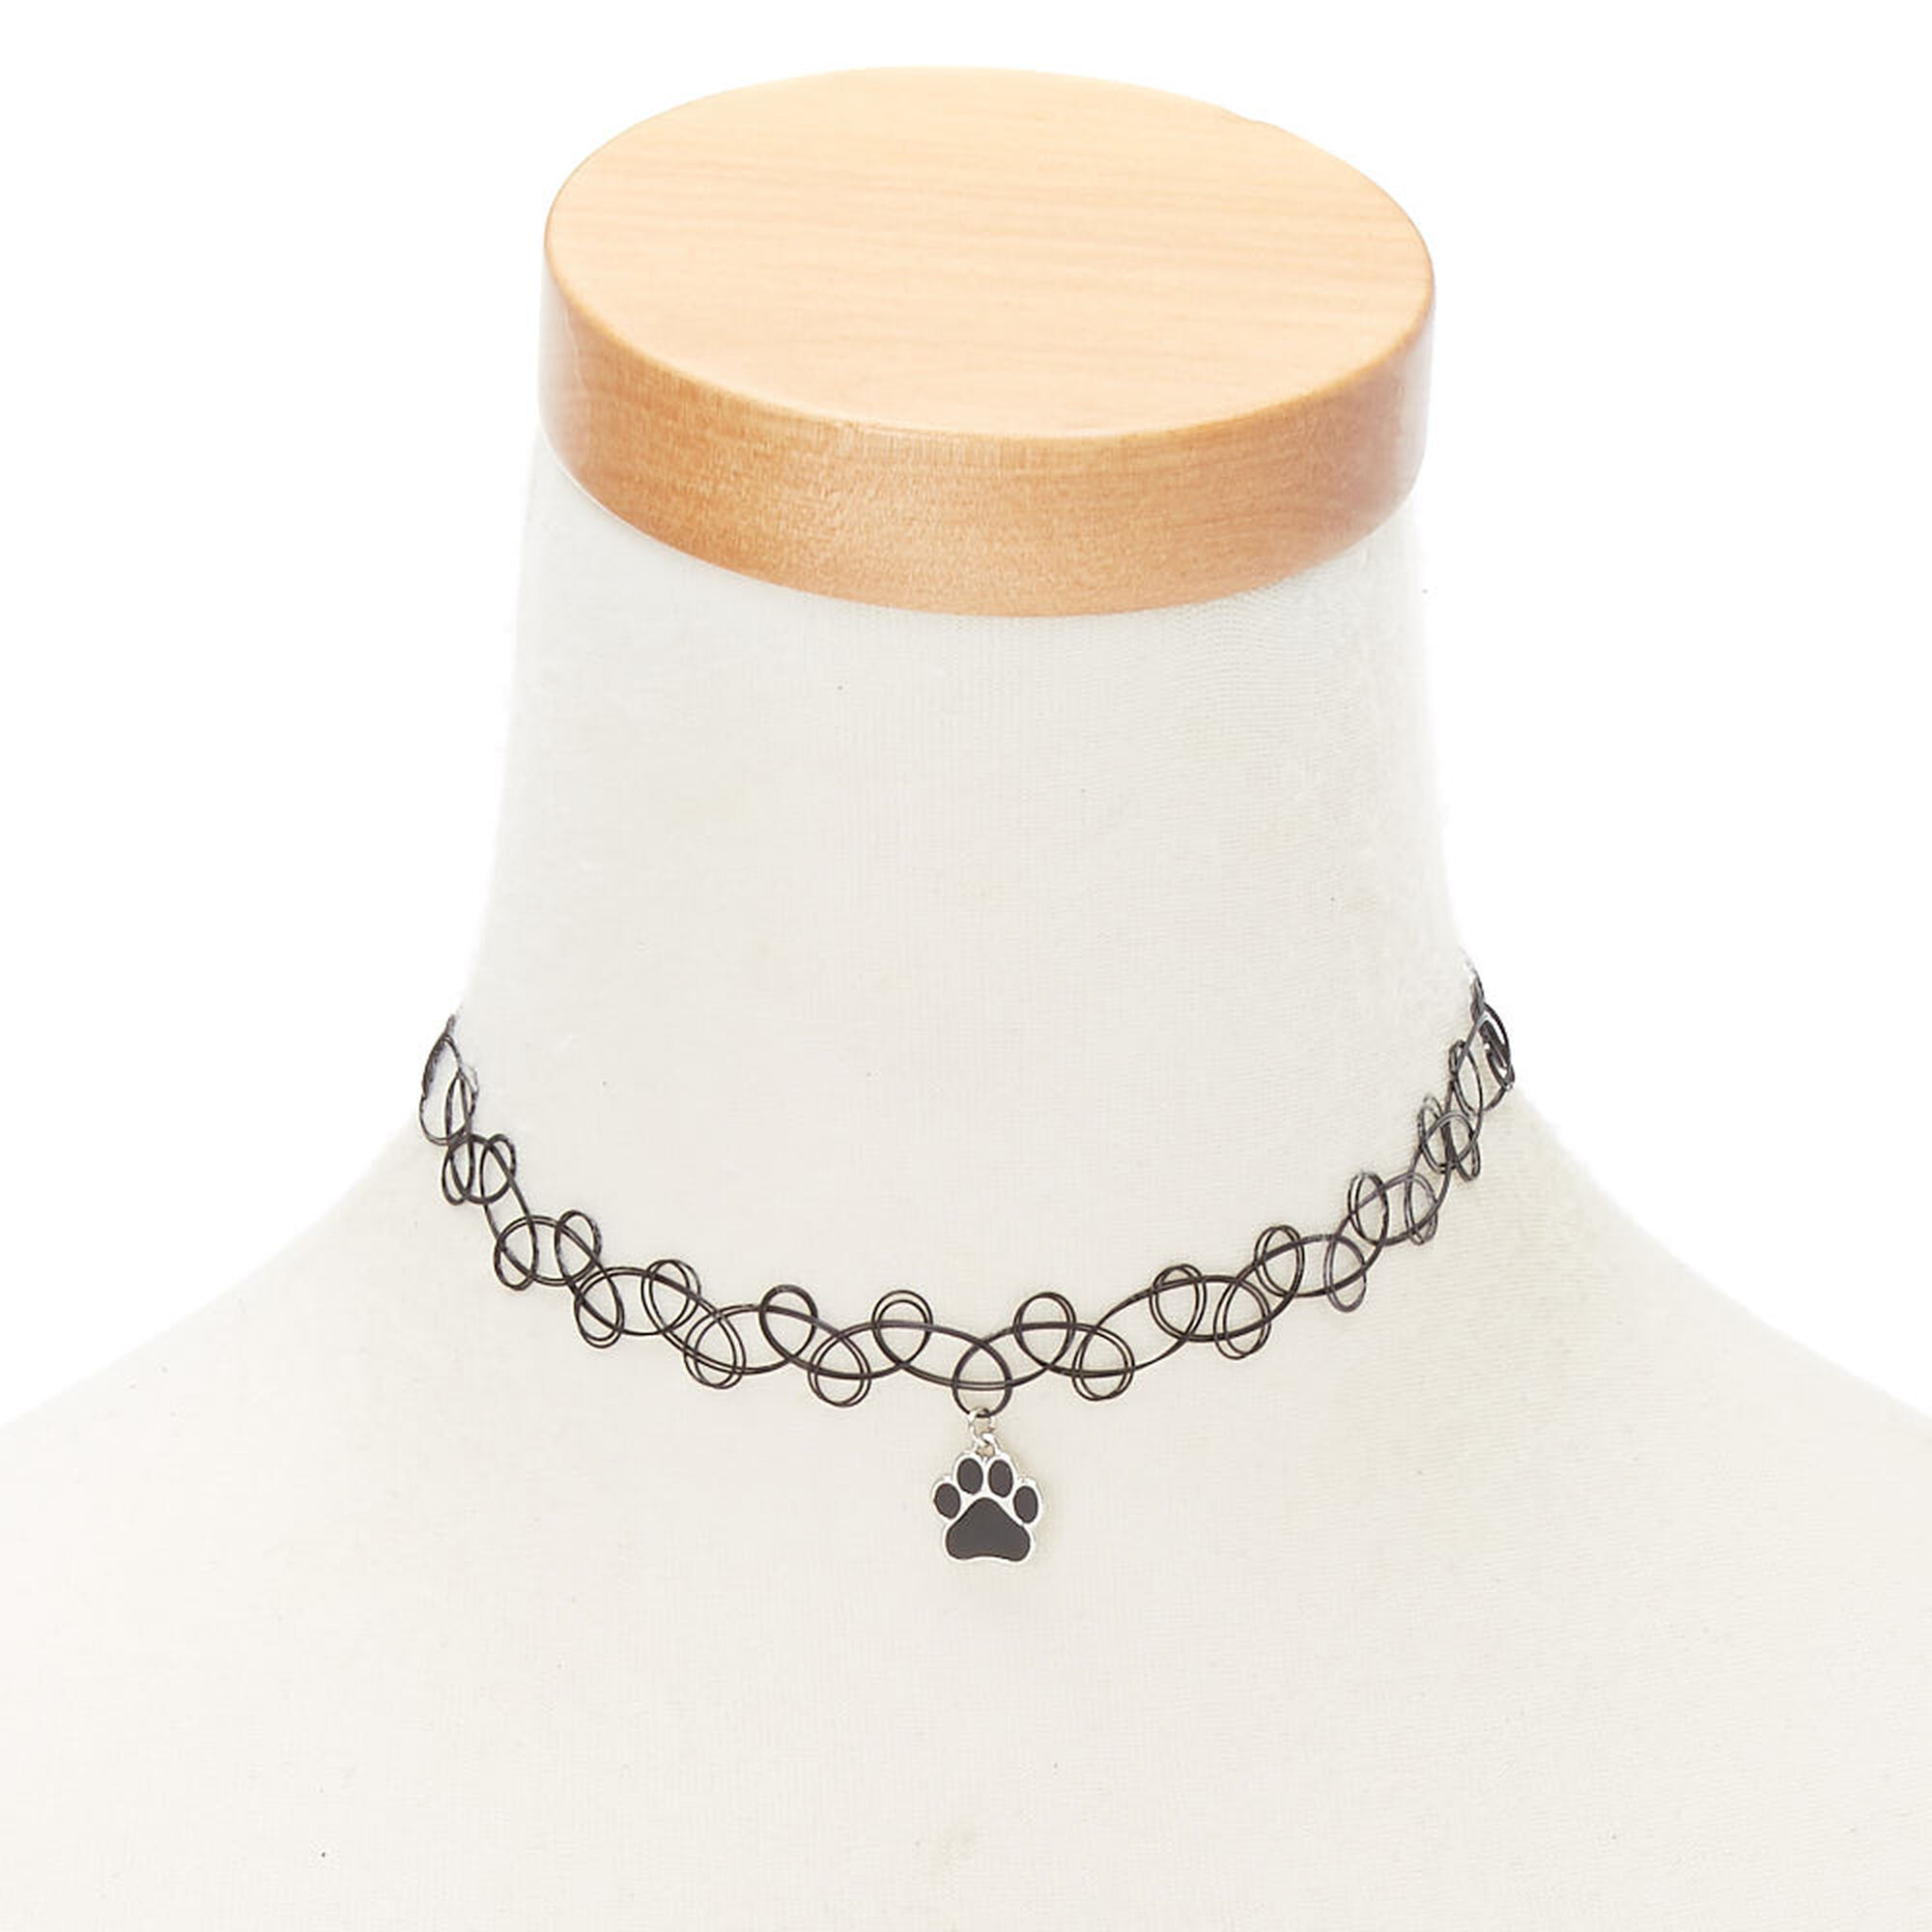 View Claires Paw Print Mood Tattoo Choker Necklace information